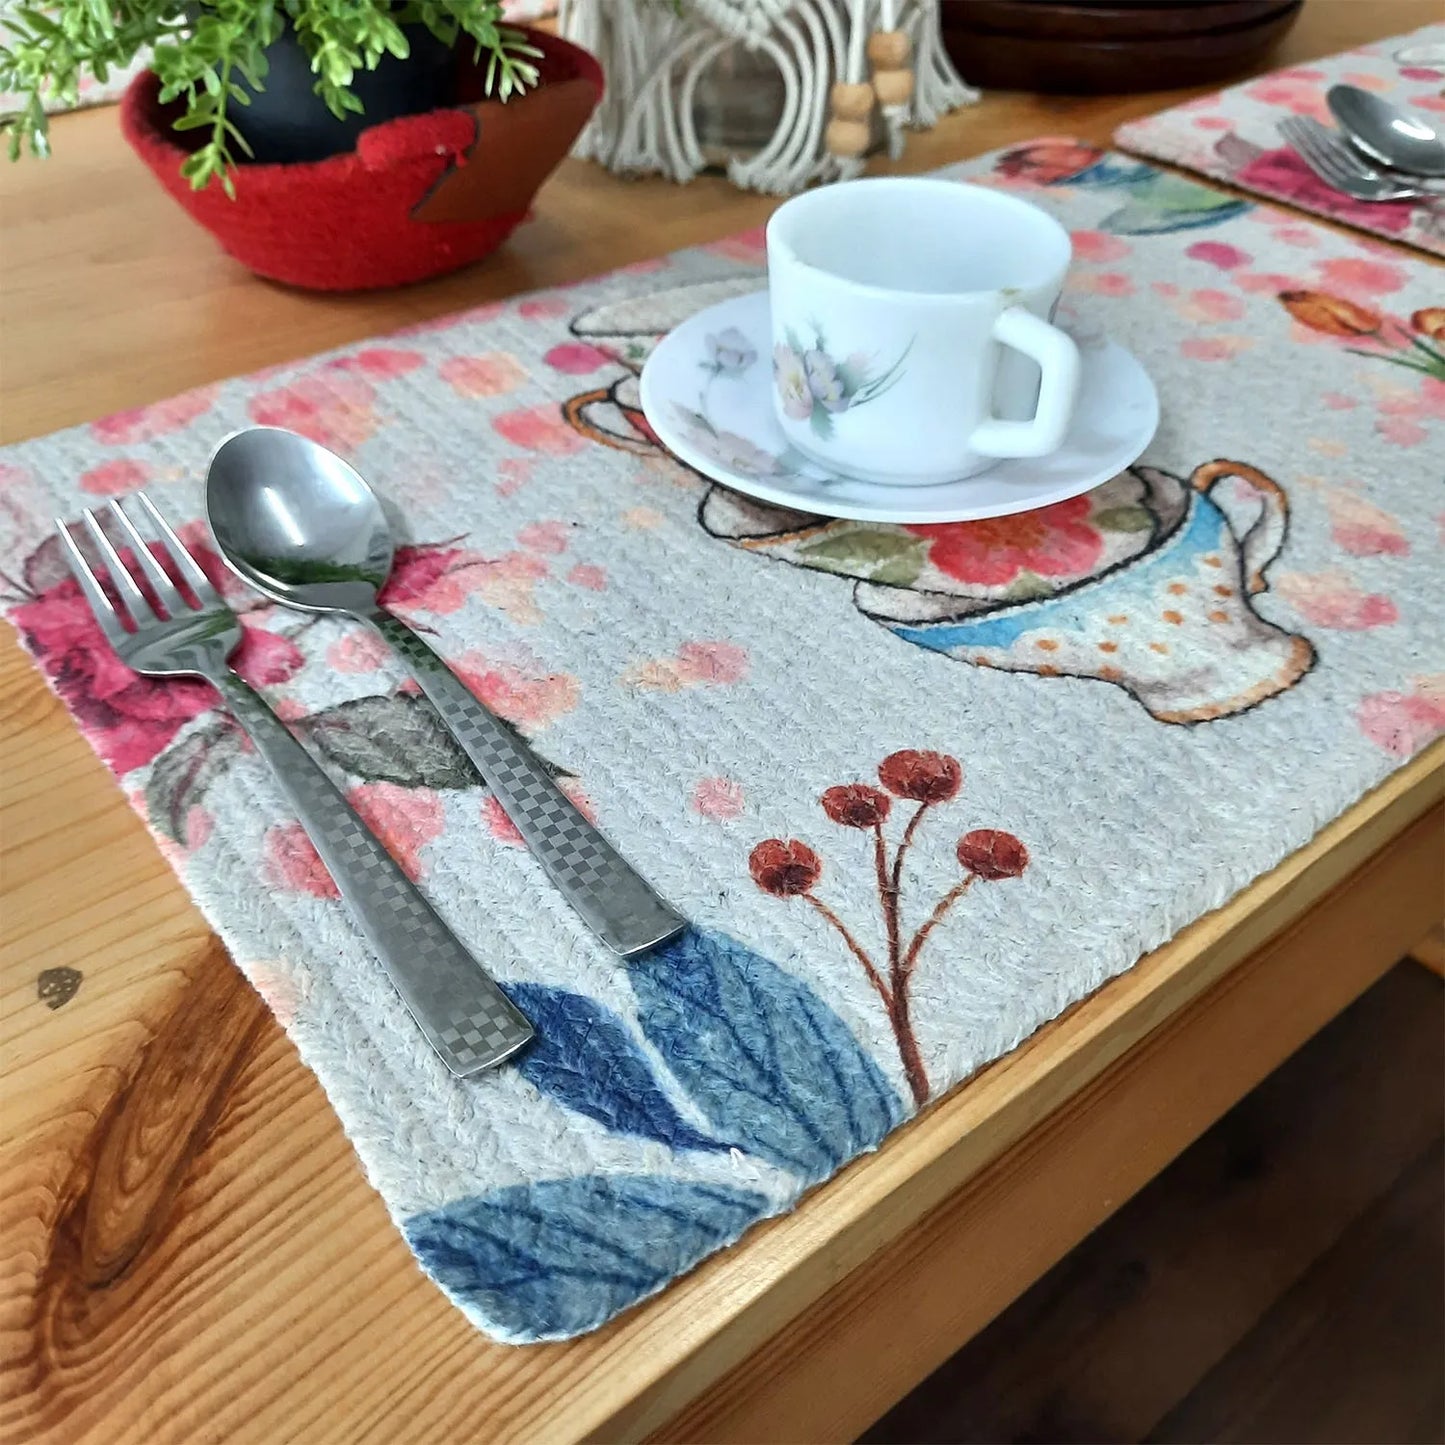 All Natural Rectangular Cotton Braided Placemats – A Busy Kitchen